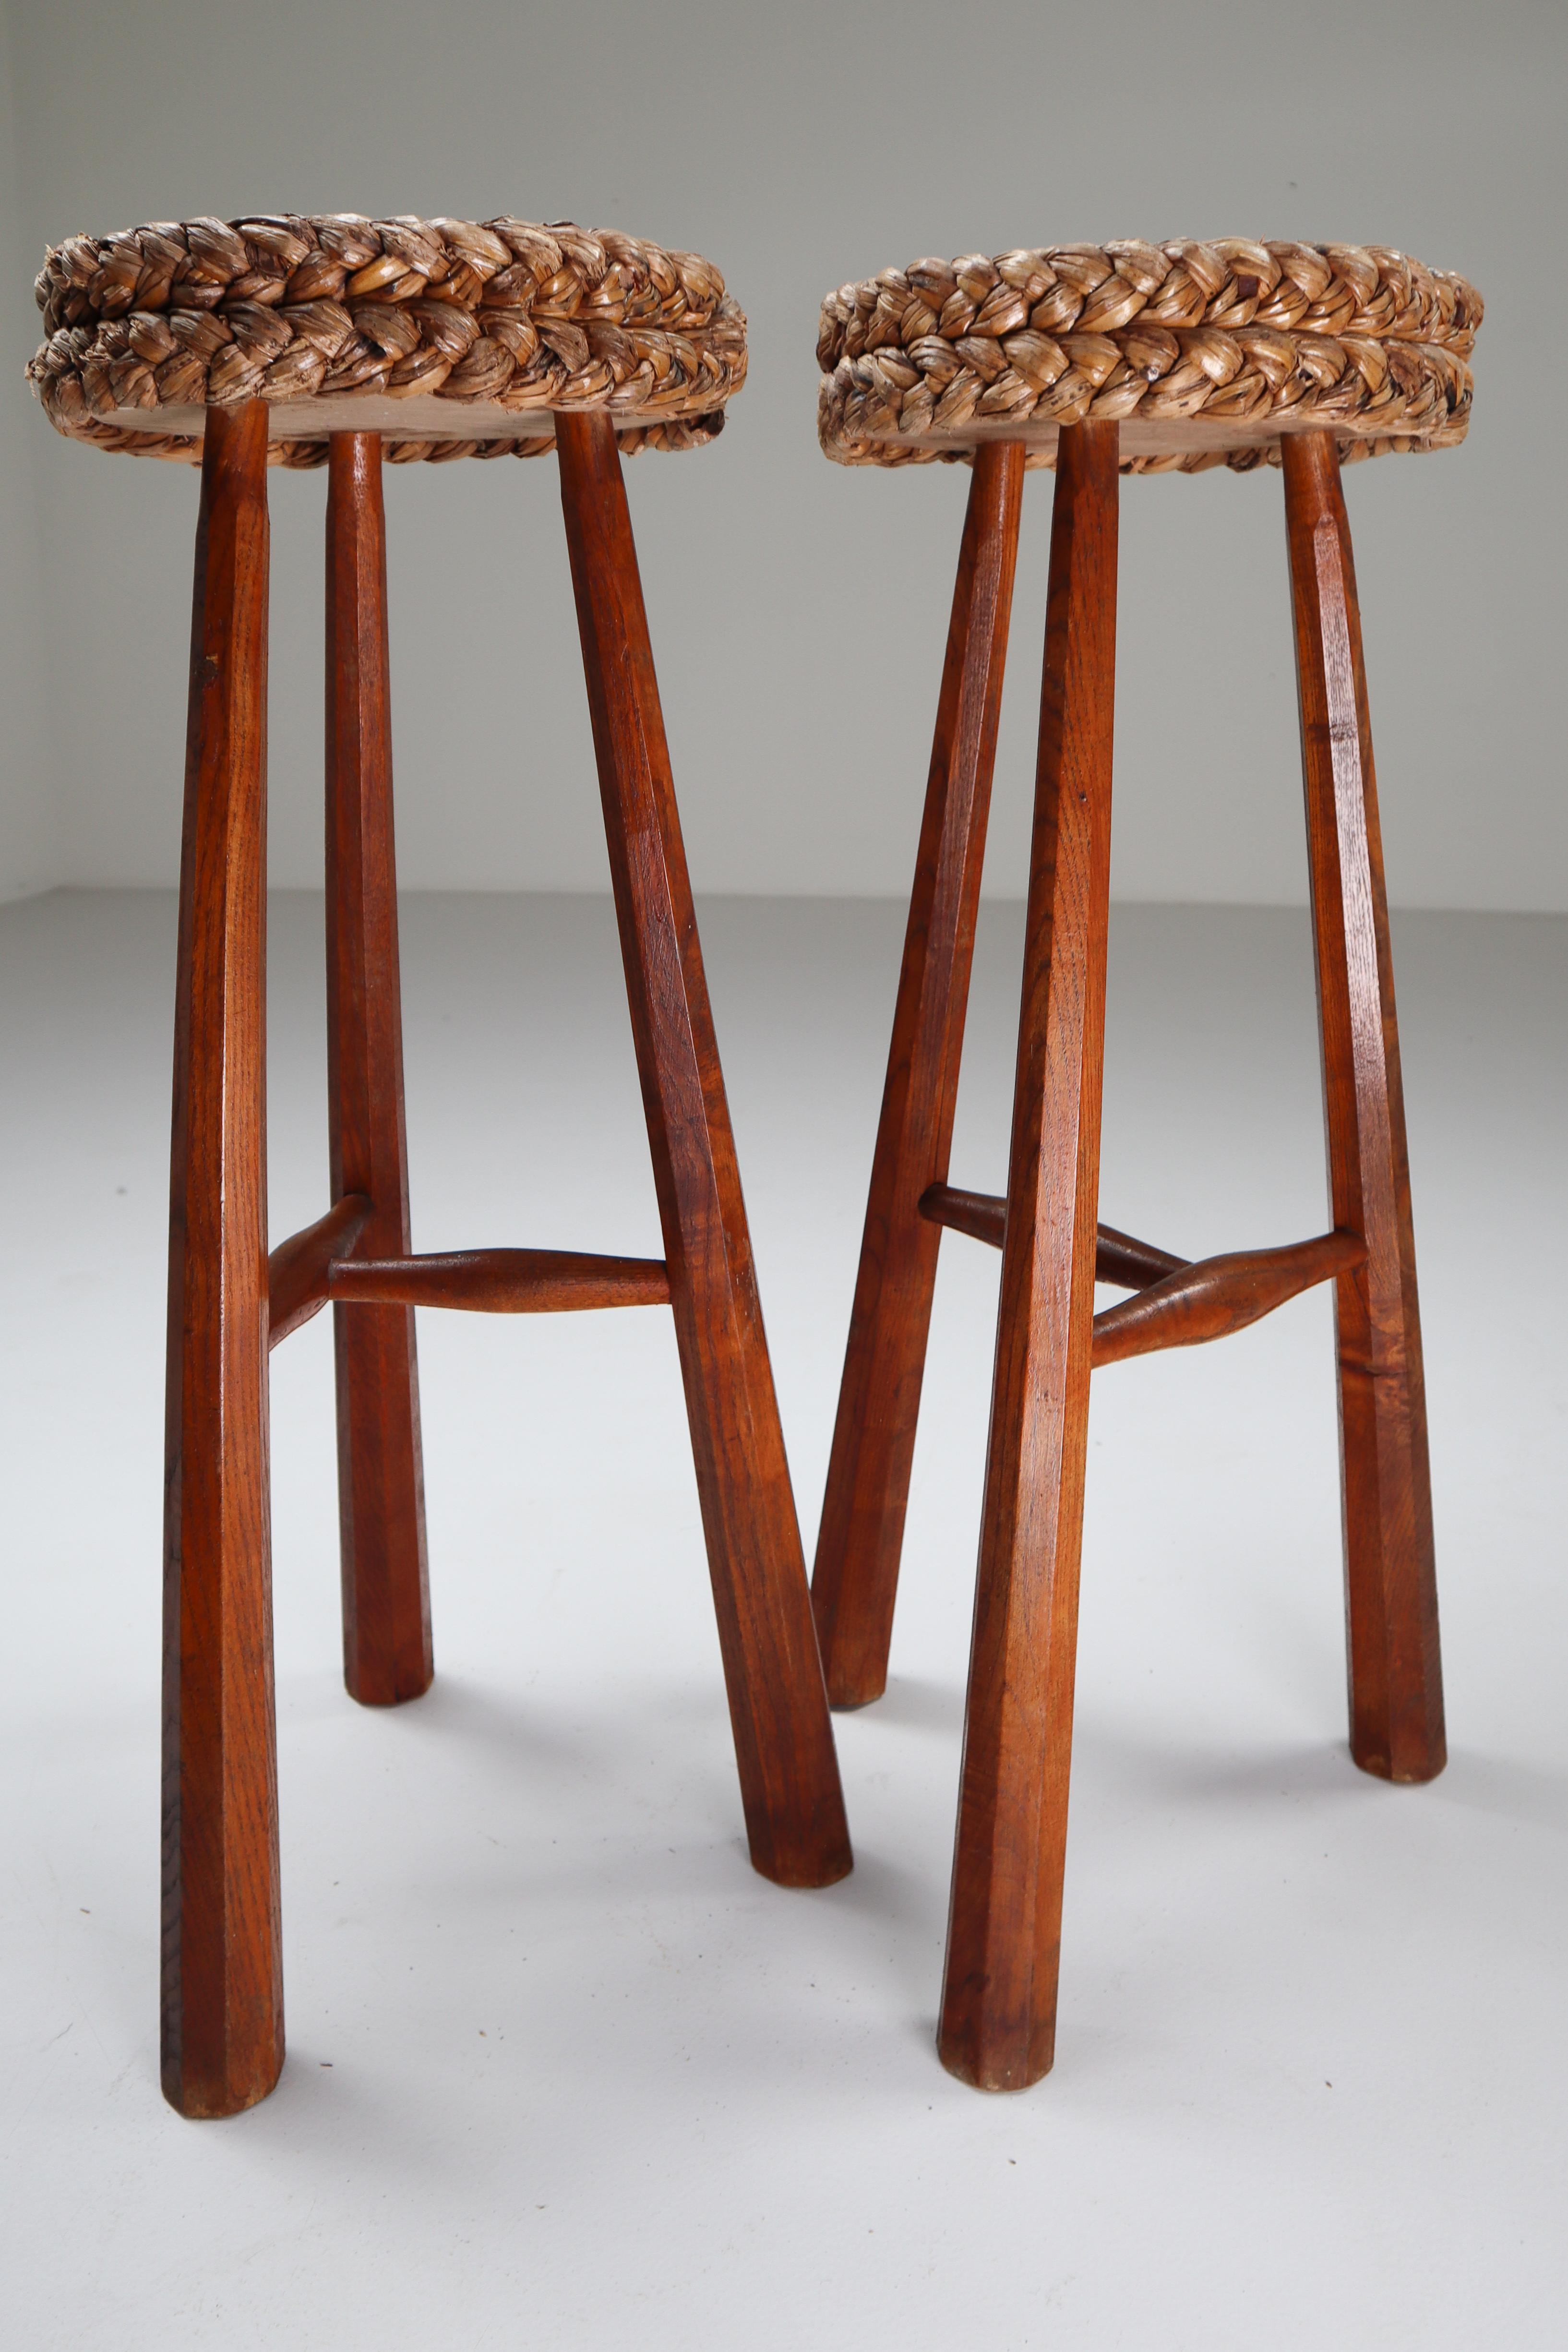 Pair of two Adrien Audoux and Frida Minet bar stools made of stained beech and abaca rope with beautiful woven design. This natural style is typical for the French design of Audoux-Minet established in Marseille. This robust French set originates